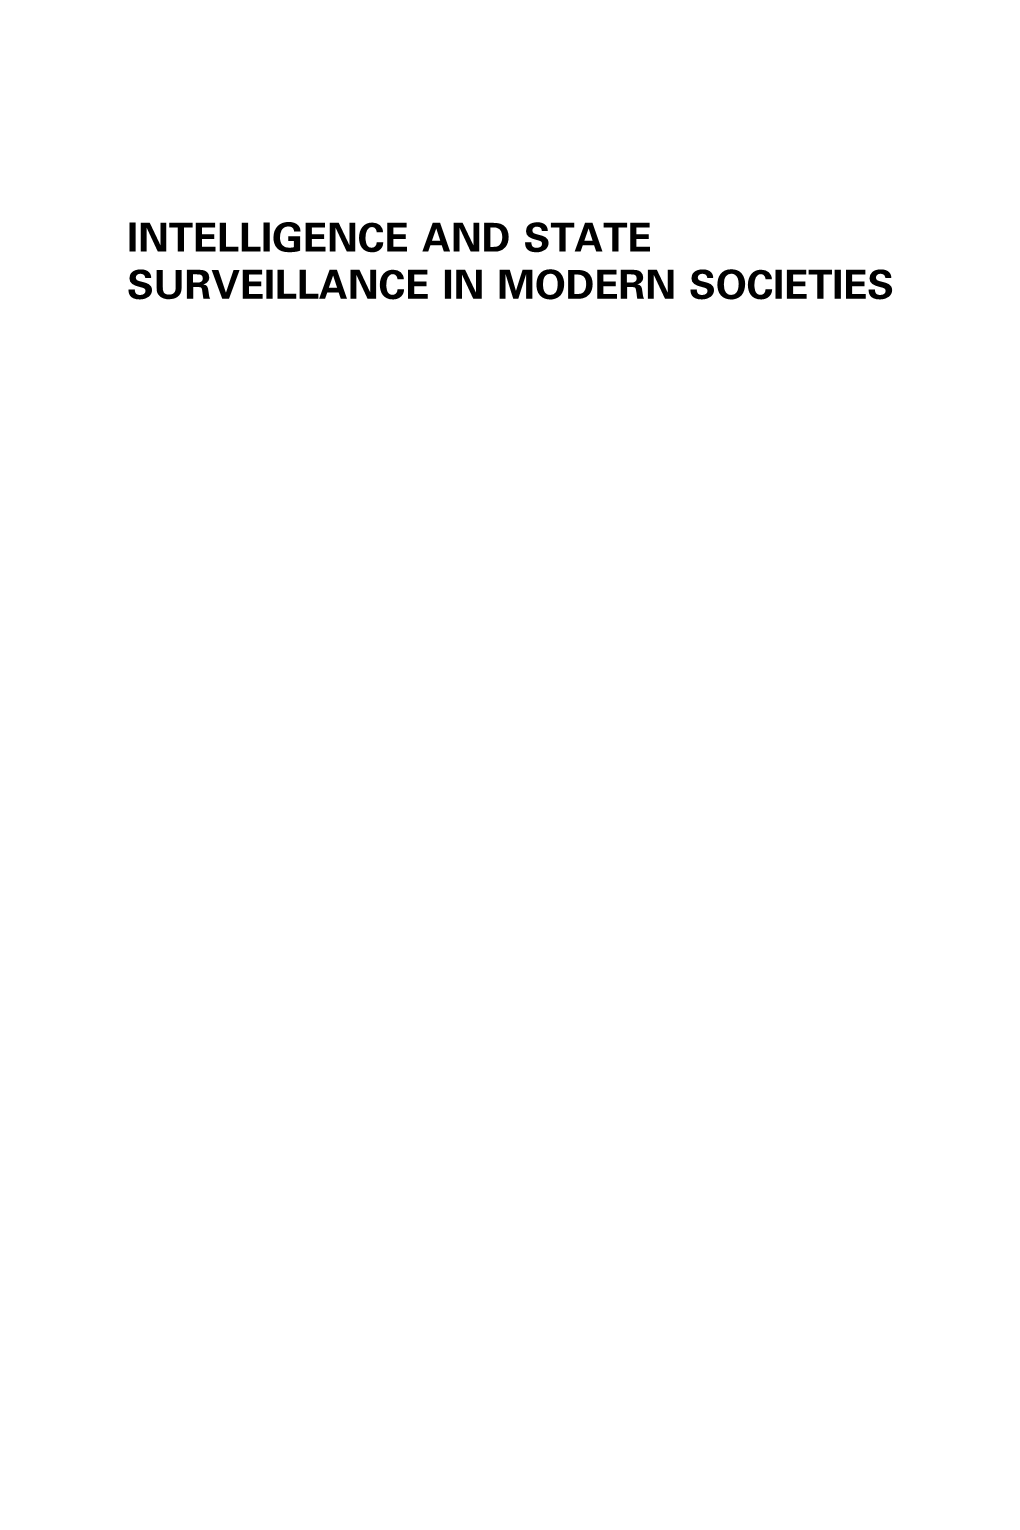 Intelligence and State Surveillance in Modern